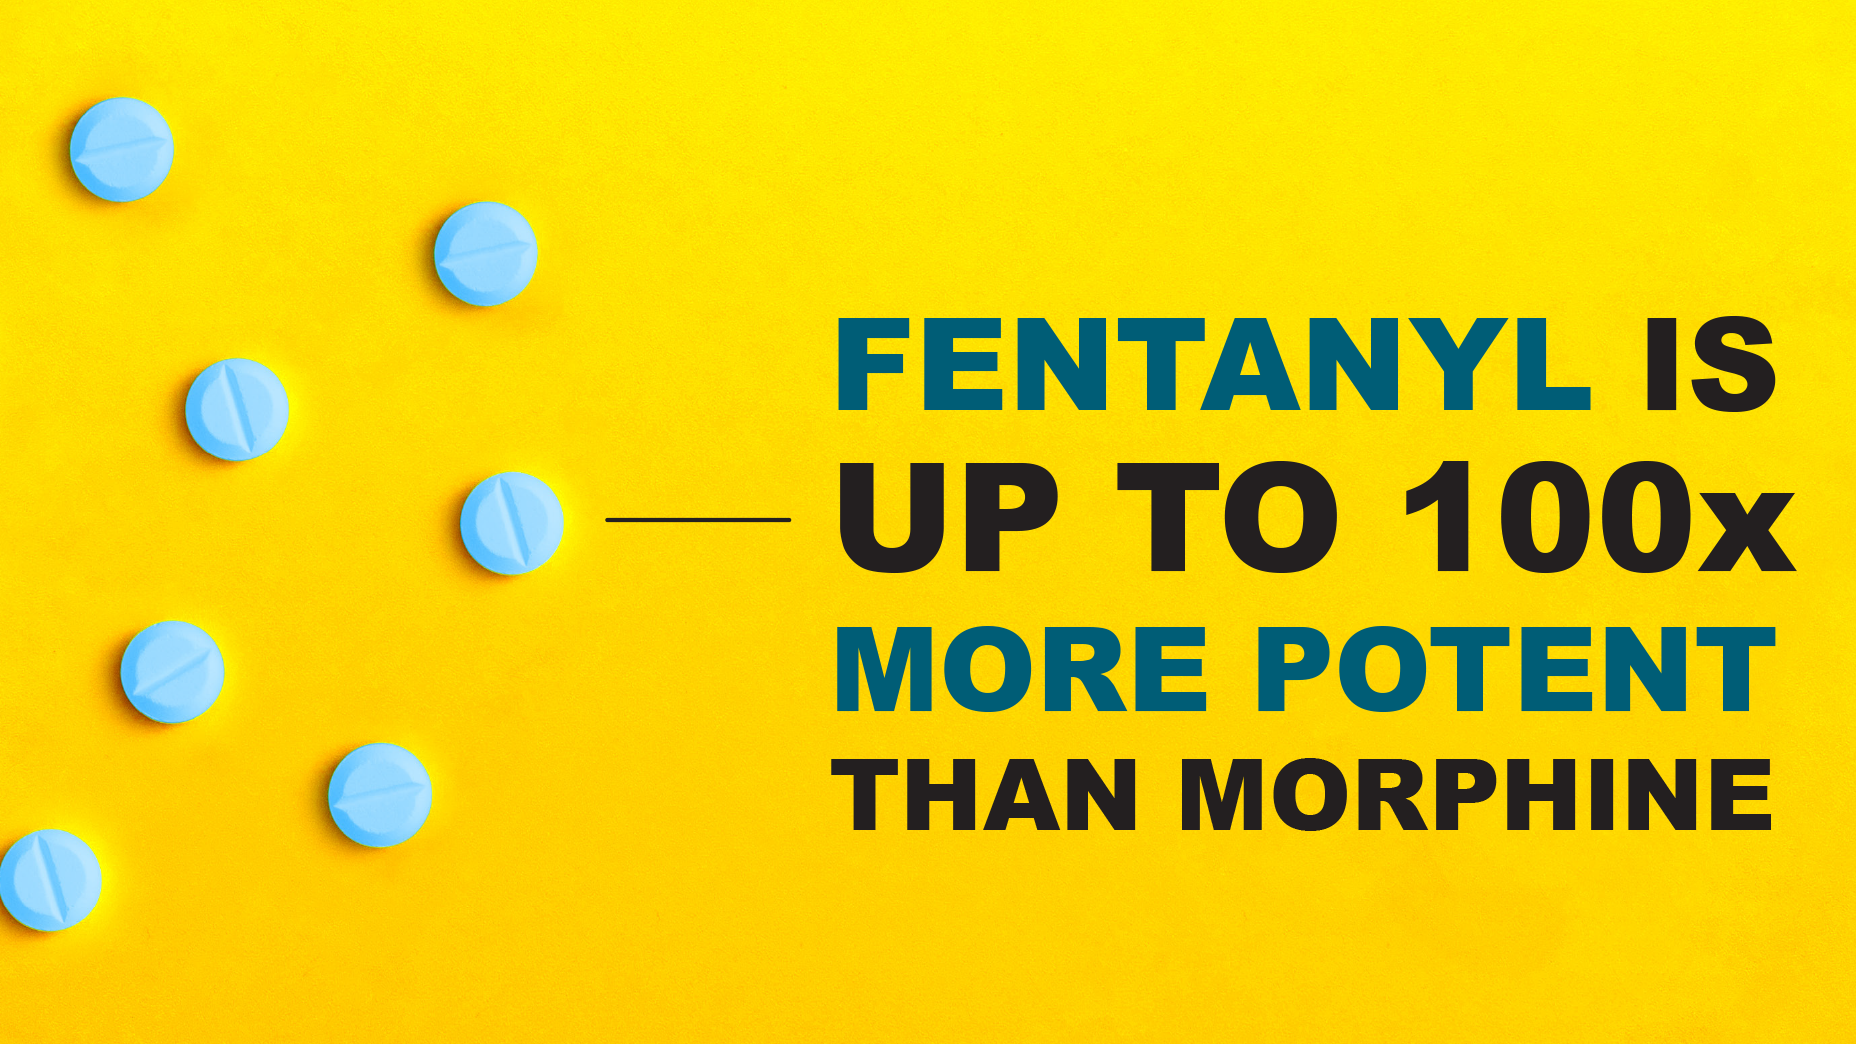 FENTANYL IS UP TO 100x MORE POTENT THAN MORPHINE